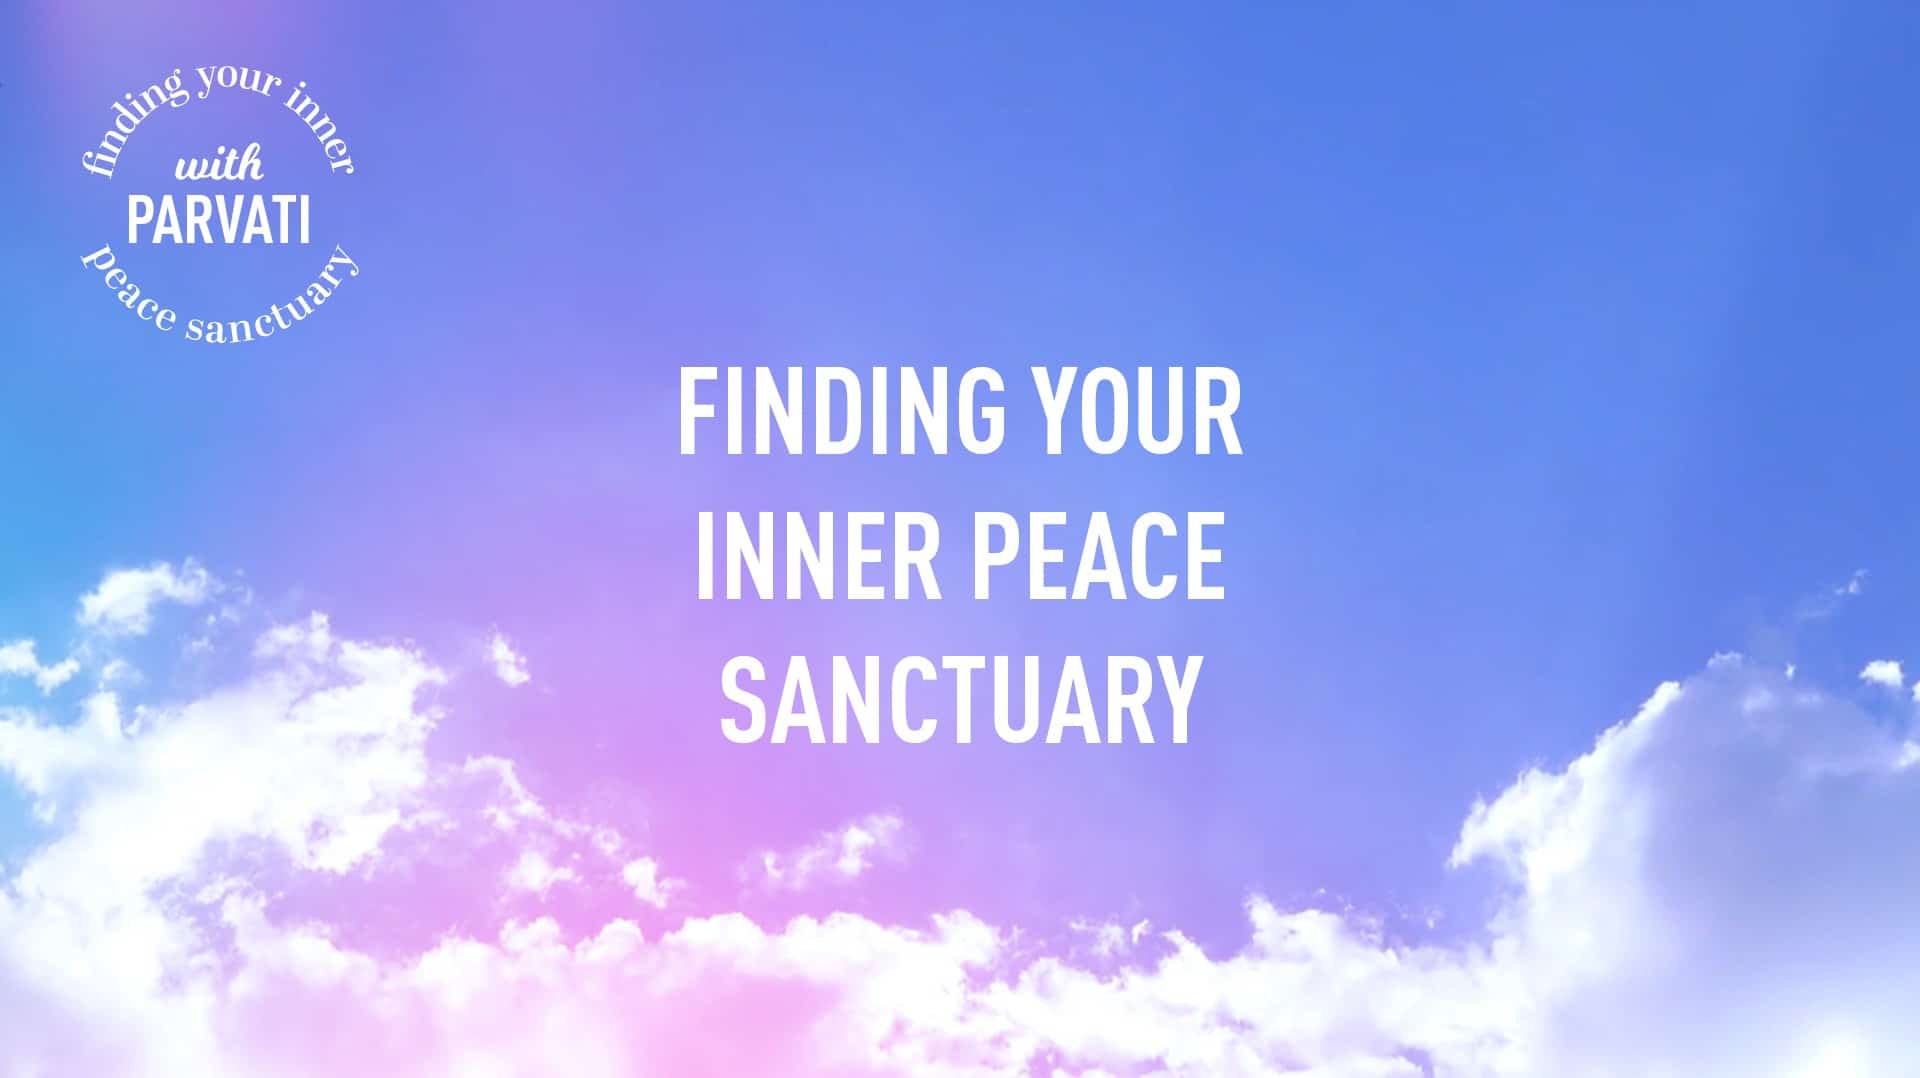 Parvati-Finding your inner peace sanctuary